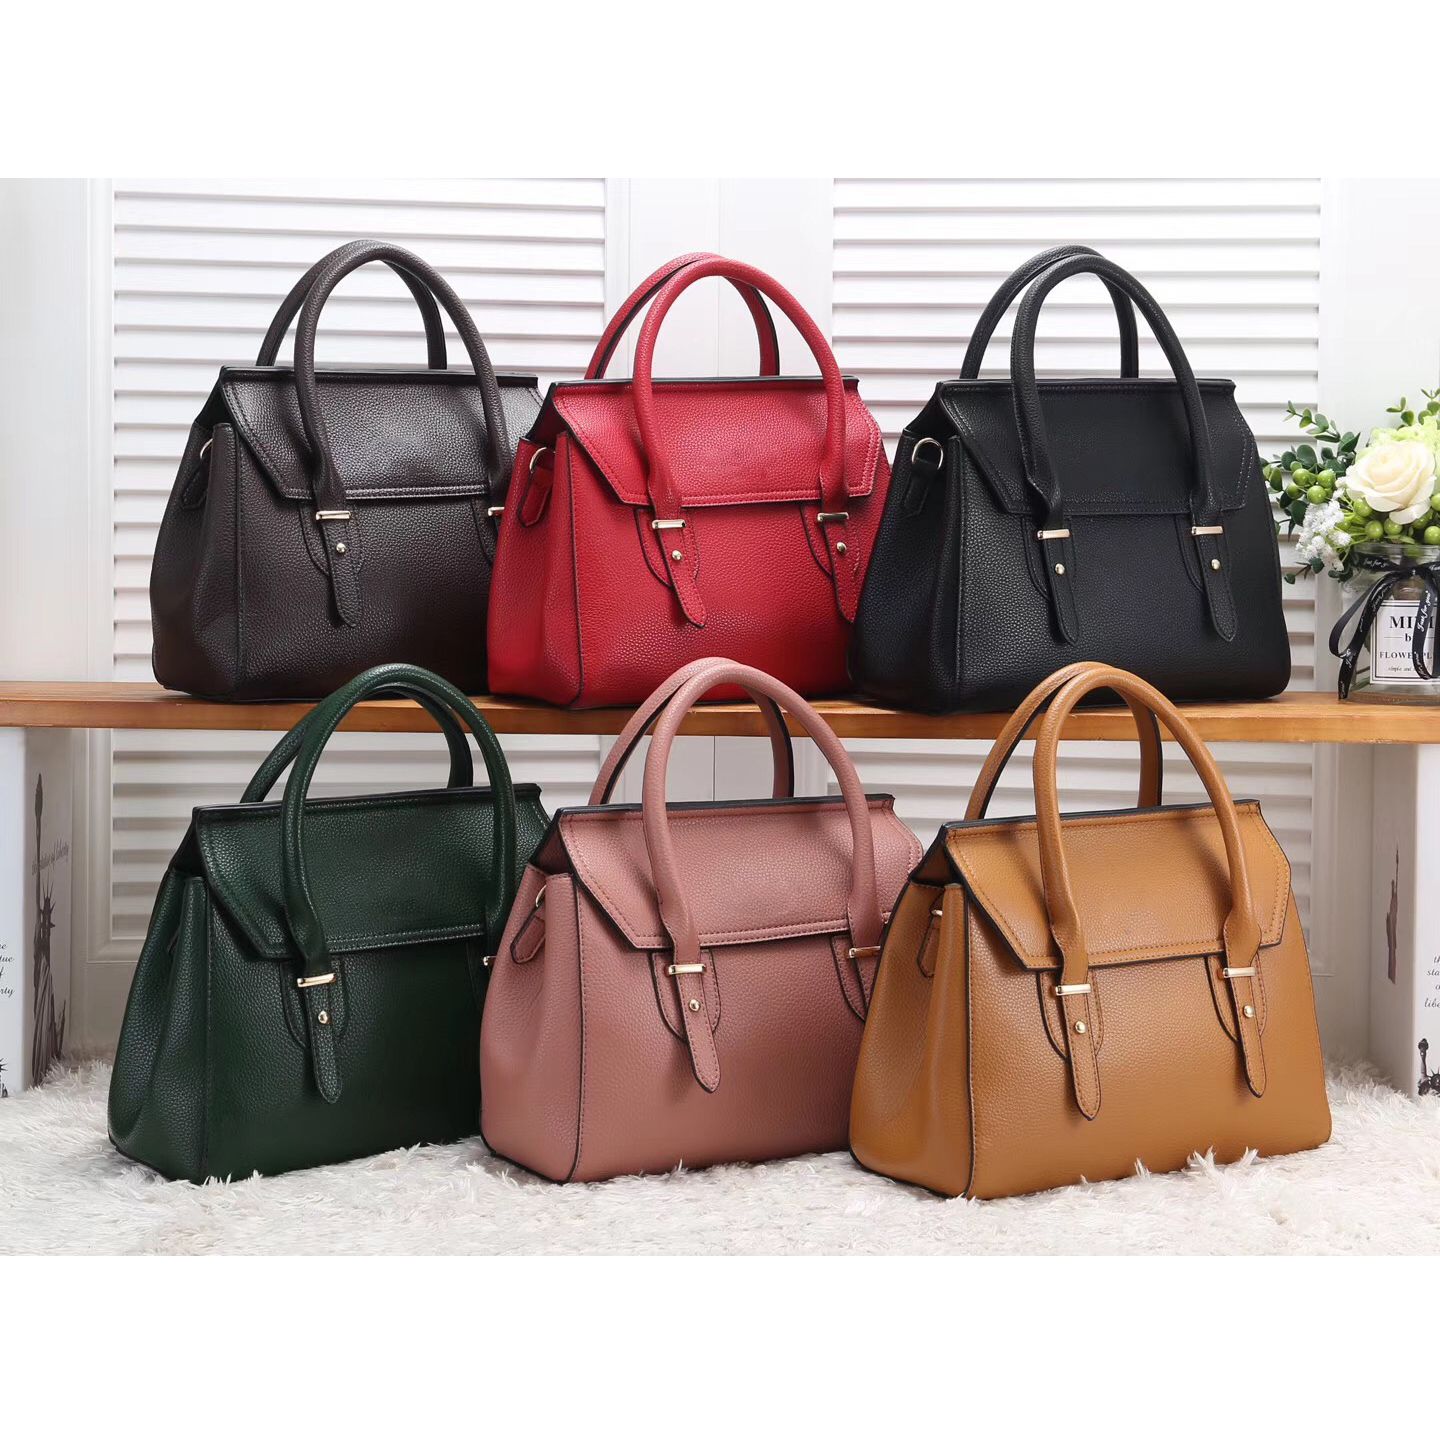 New Fashion Handbags Women Bags Ladies Shoulder Bags Leather Purses Famous  Brand Large Designer Crossbody Tote Bag From Propcm_bags, $35.4 | DHgate.Com